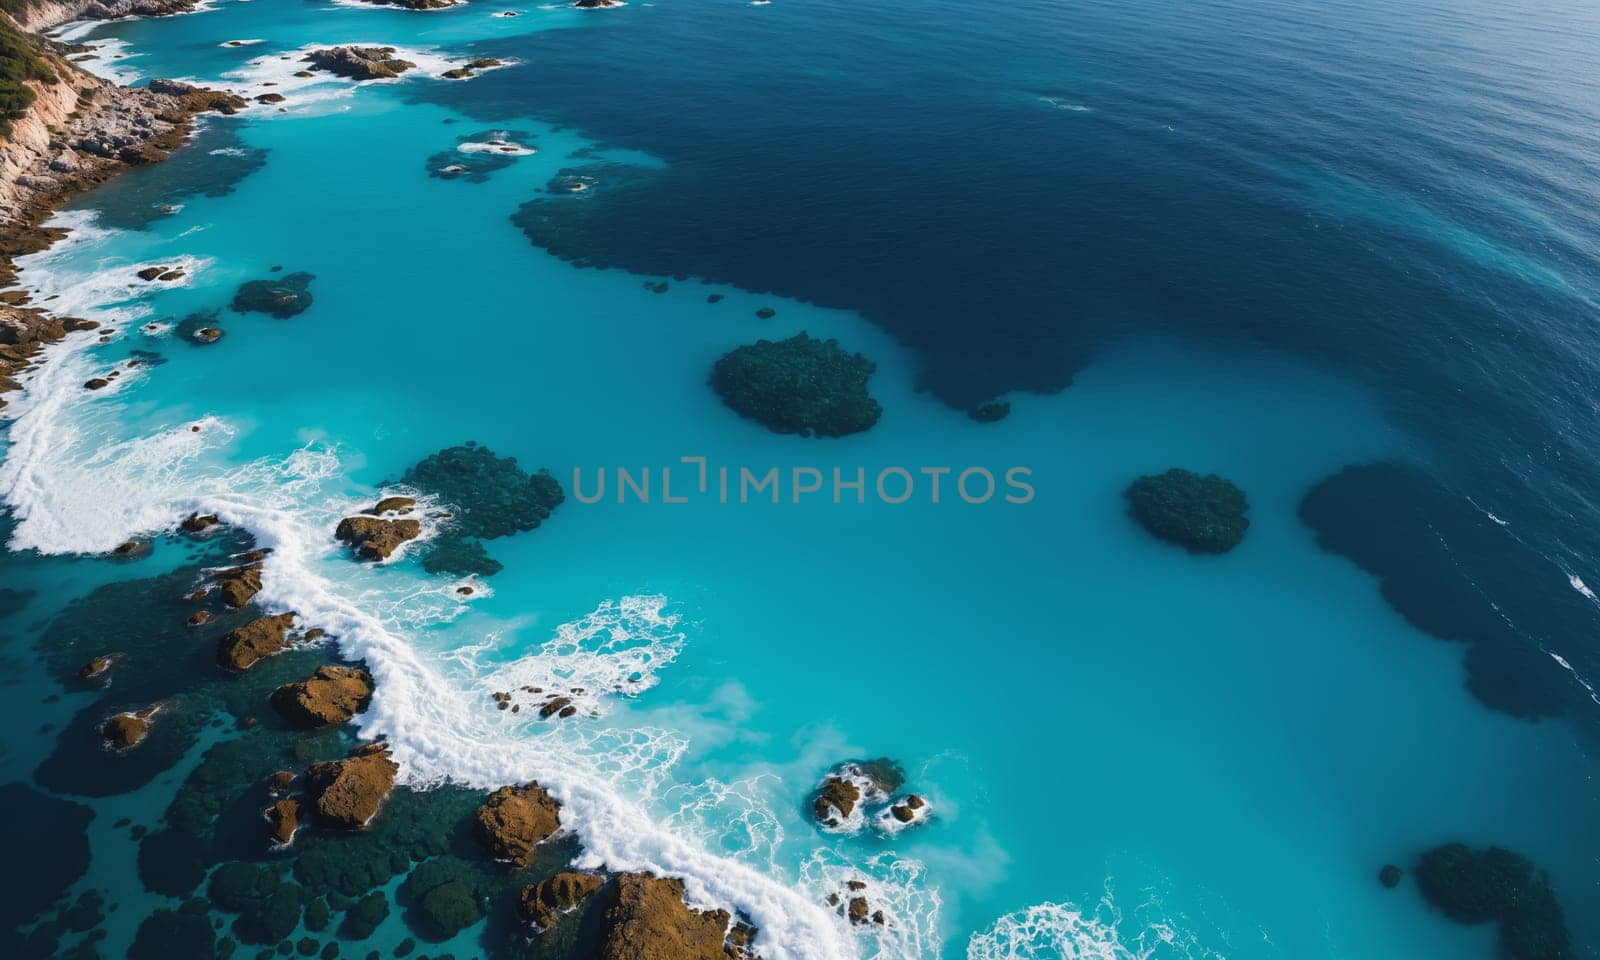 Aerial View of Turquoise Ocean Waves by Andre1ns